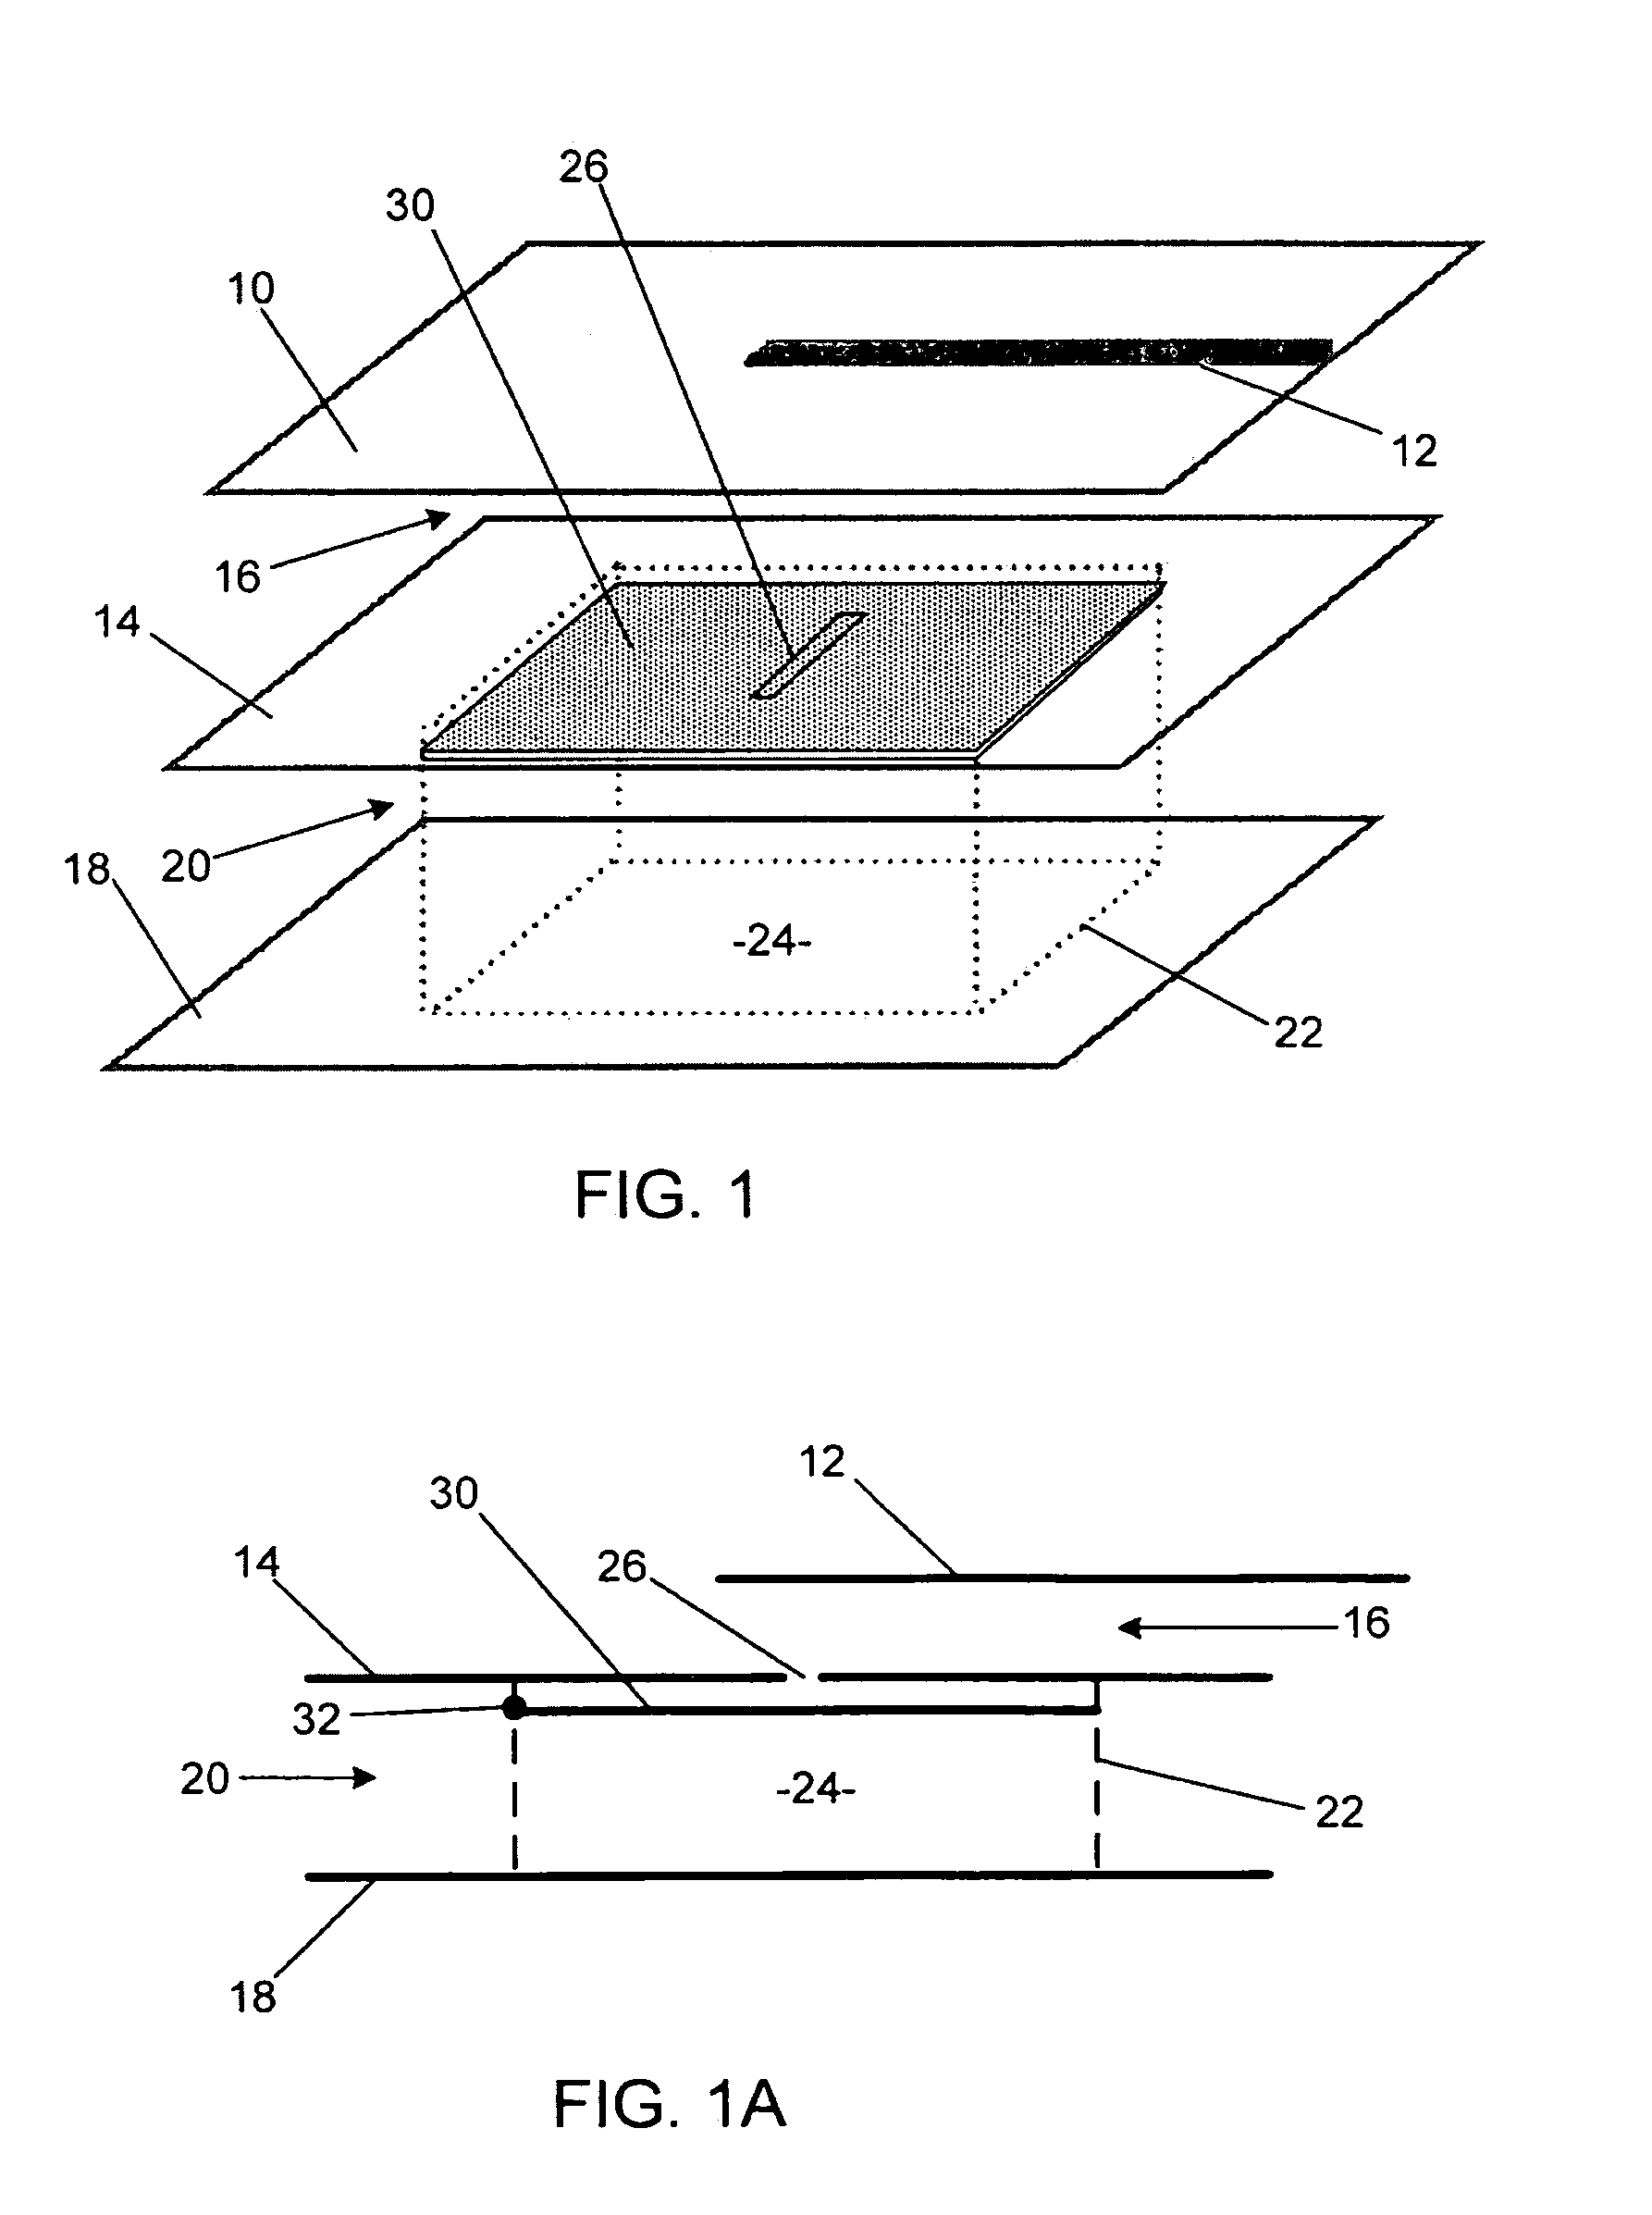 Monolithic microwave integrated circuit (MMIC) waveguide resonators having a tunable ferroelectric layer